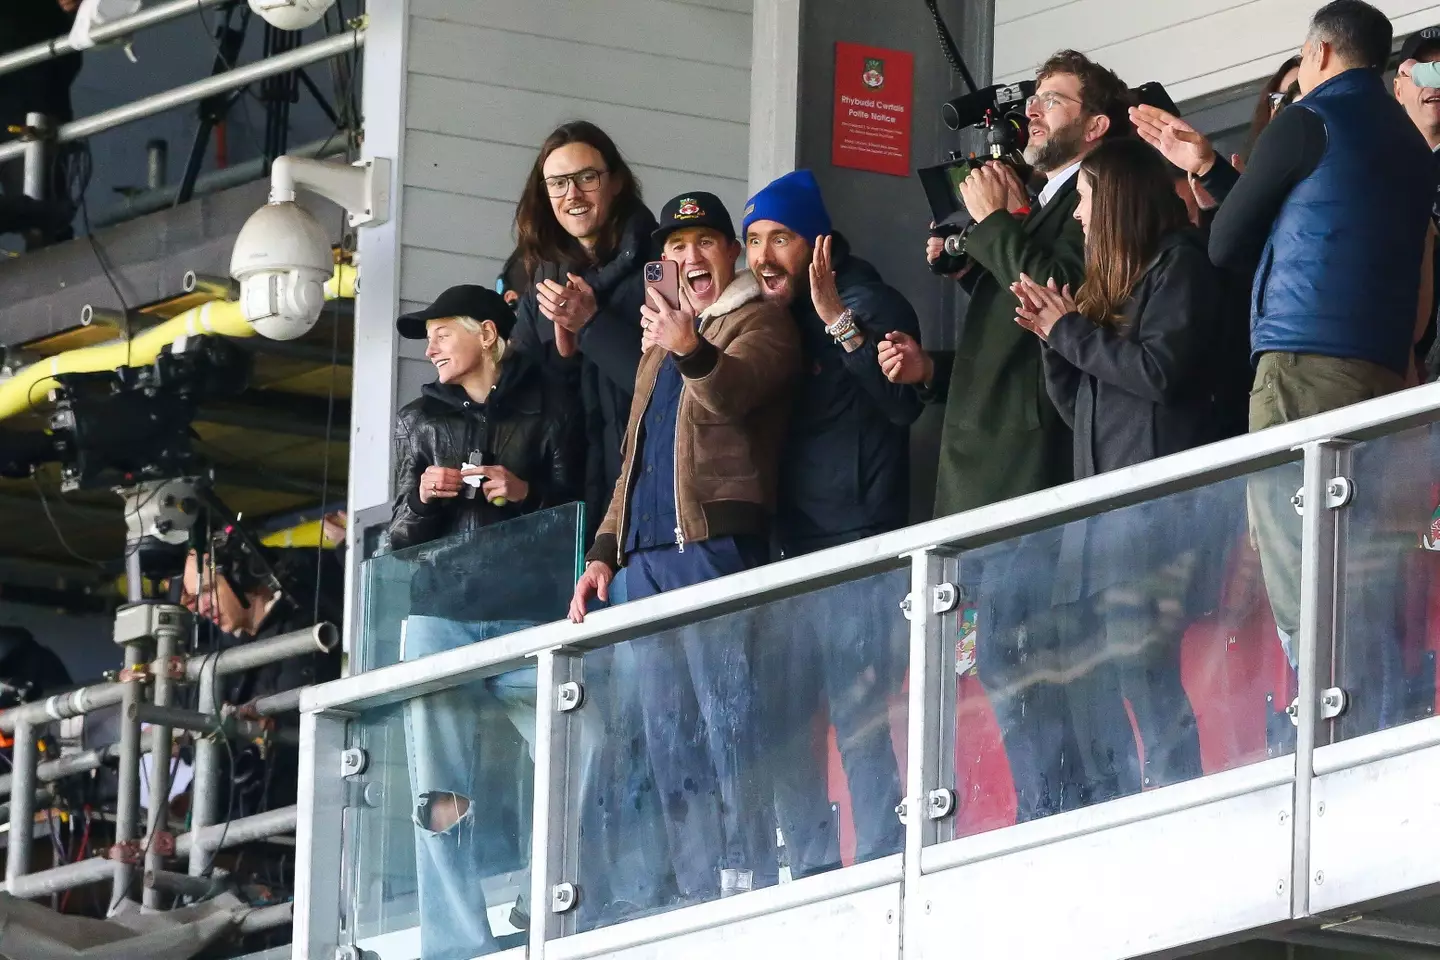 Reynolds and Mcelhenny getting excited in the stands. Image: Alamy